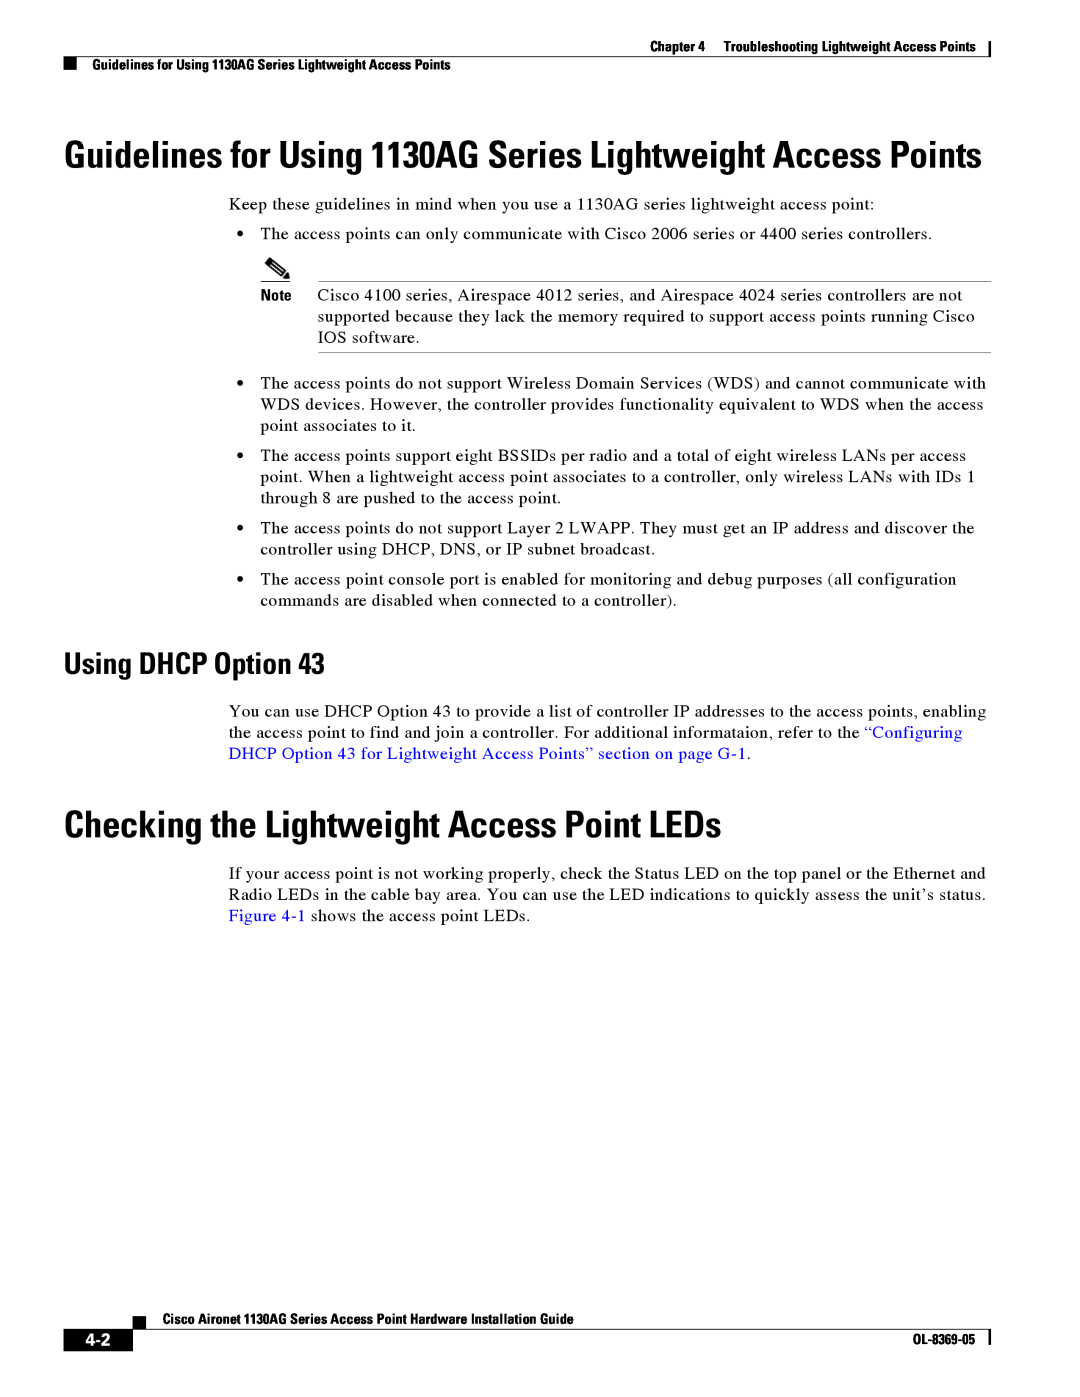 Cisco Systems 1130AG manual Checking the Lightweight Access Point LEDs, Using DHCP Option 